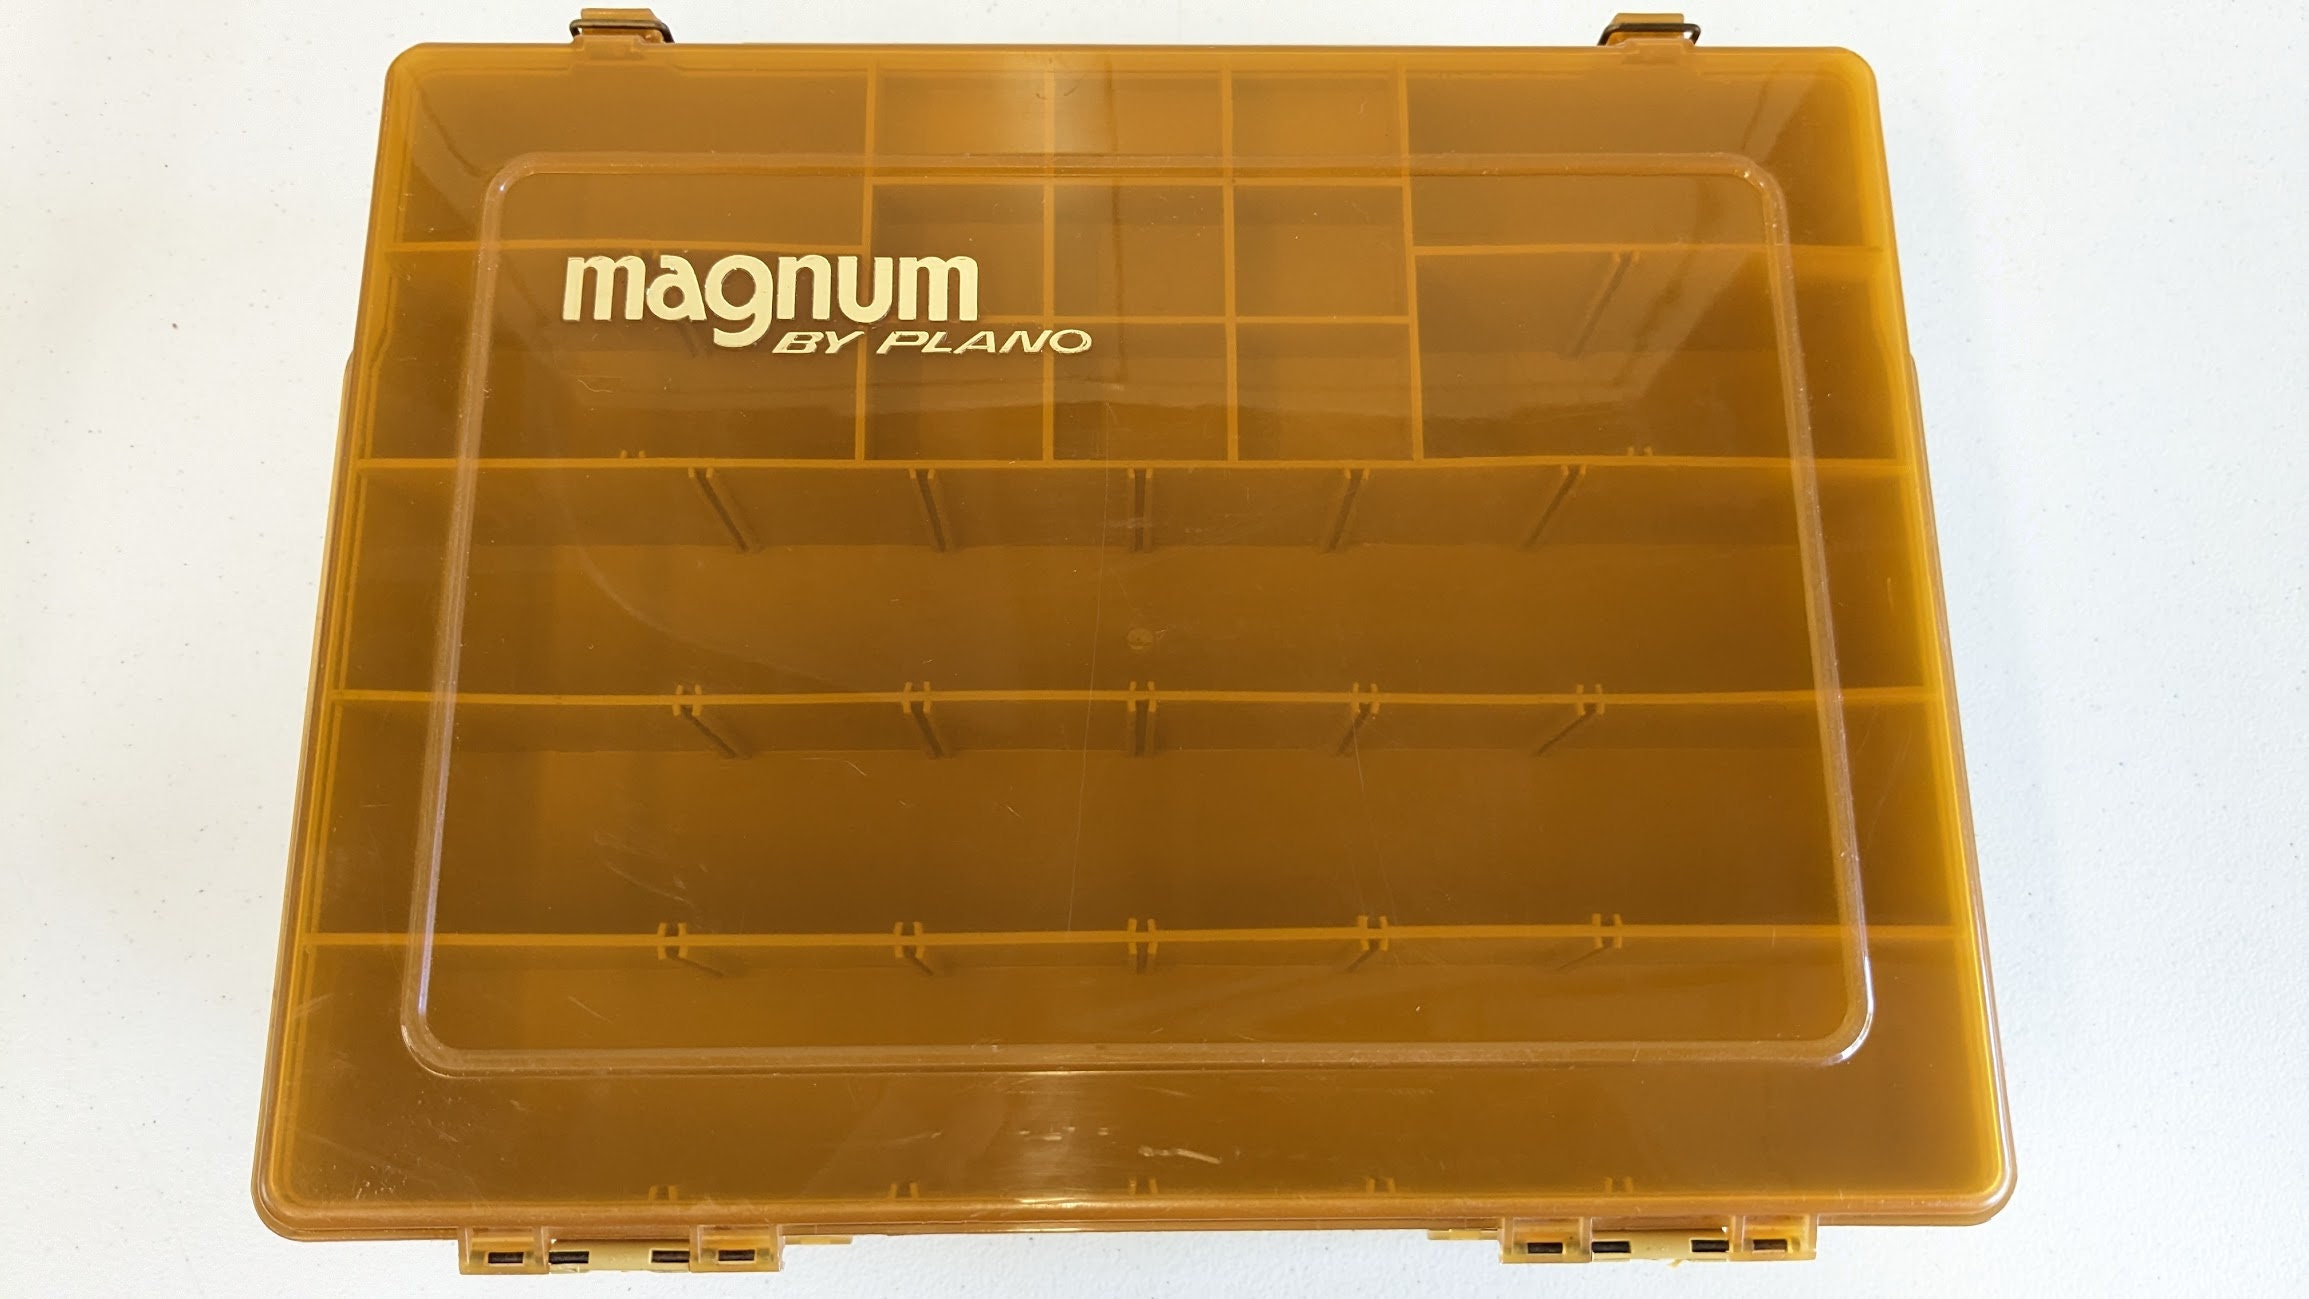 RARE DOUBLE-SIDED New Never Used Vintage 1984 Plano Magnum Model 1162  Fishing Tackle Box Hobby Sewing Collecting Organizer 